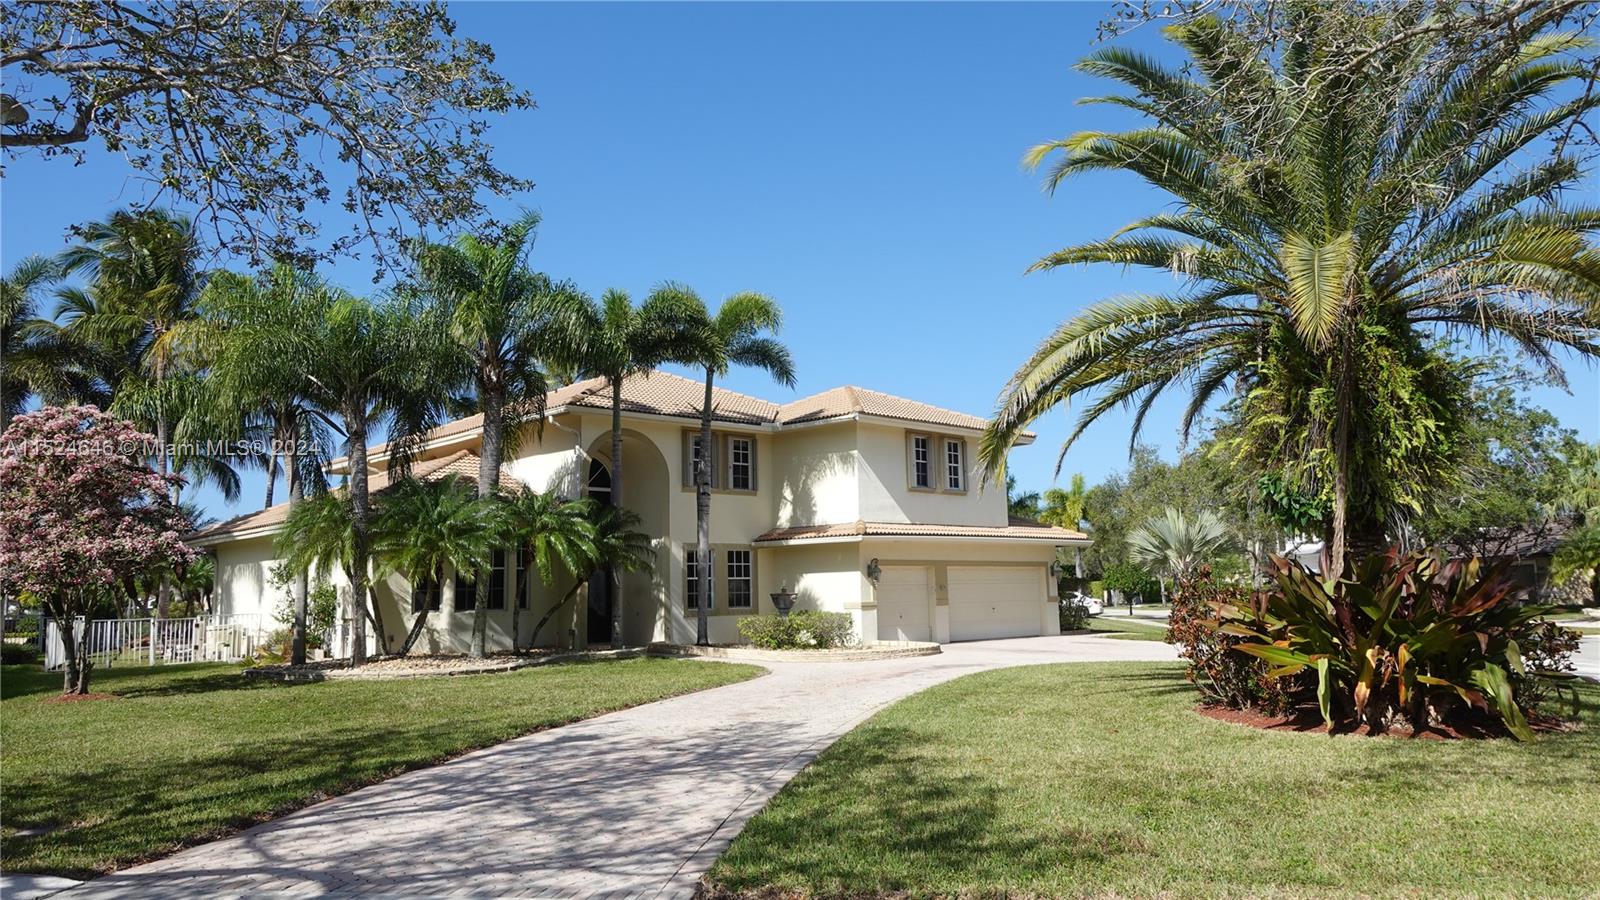 17734 Sw 12th St St, Pembroke Pines, Miami-Dade County, Florida - 5 Bedrooms  
6 Bathrooms - 